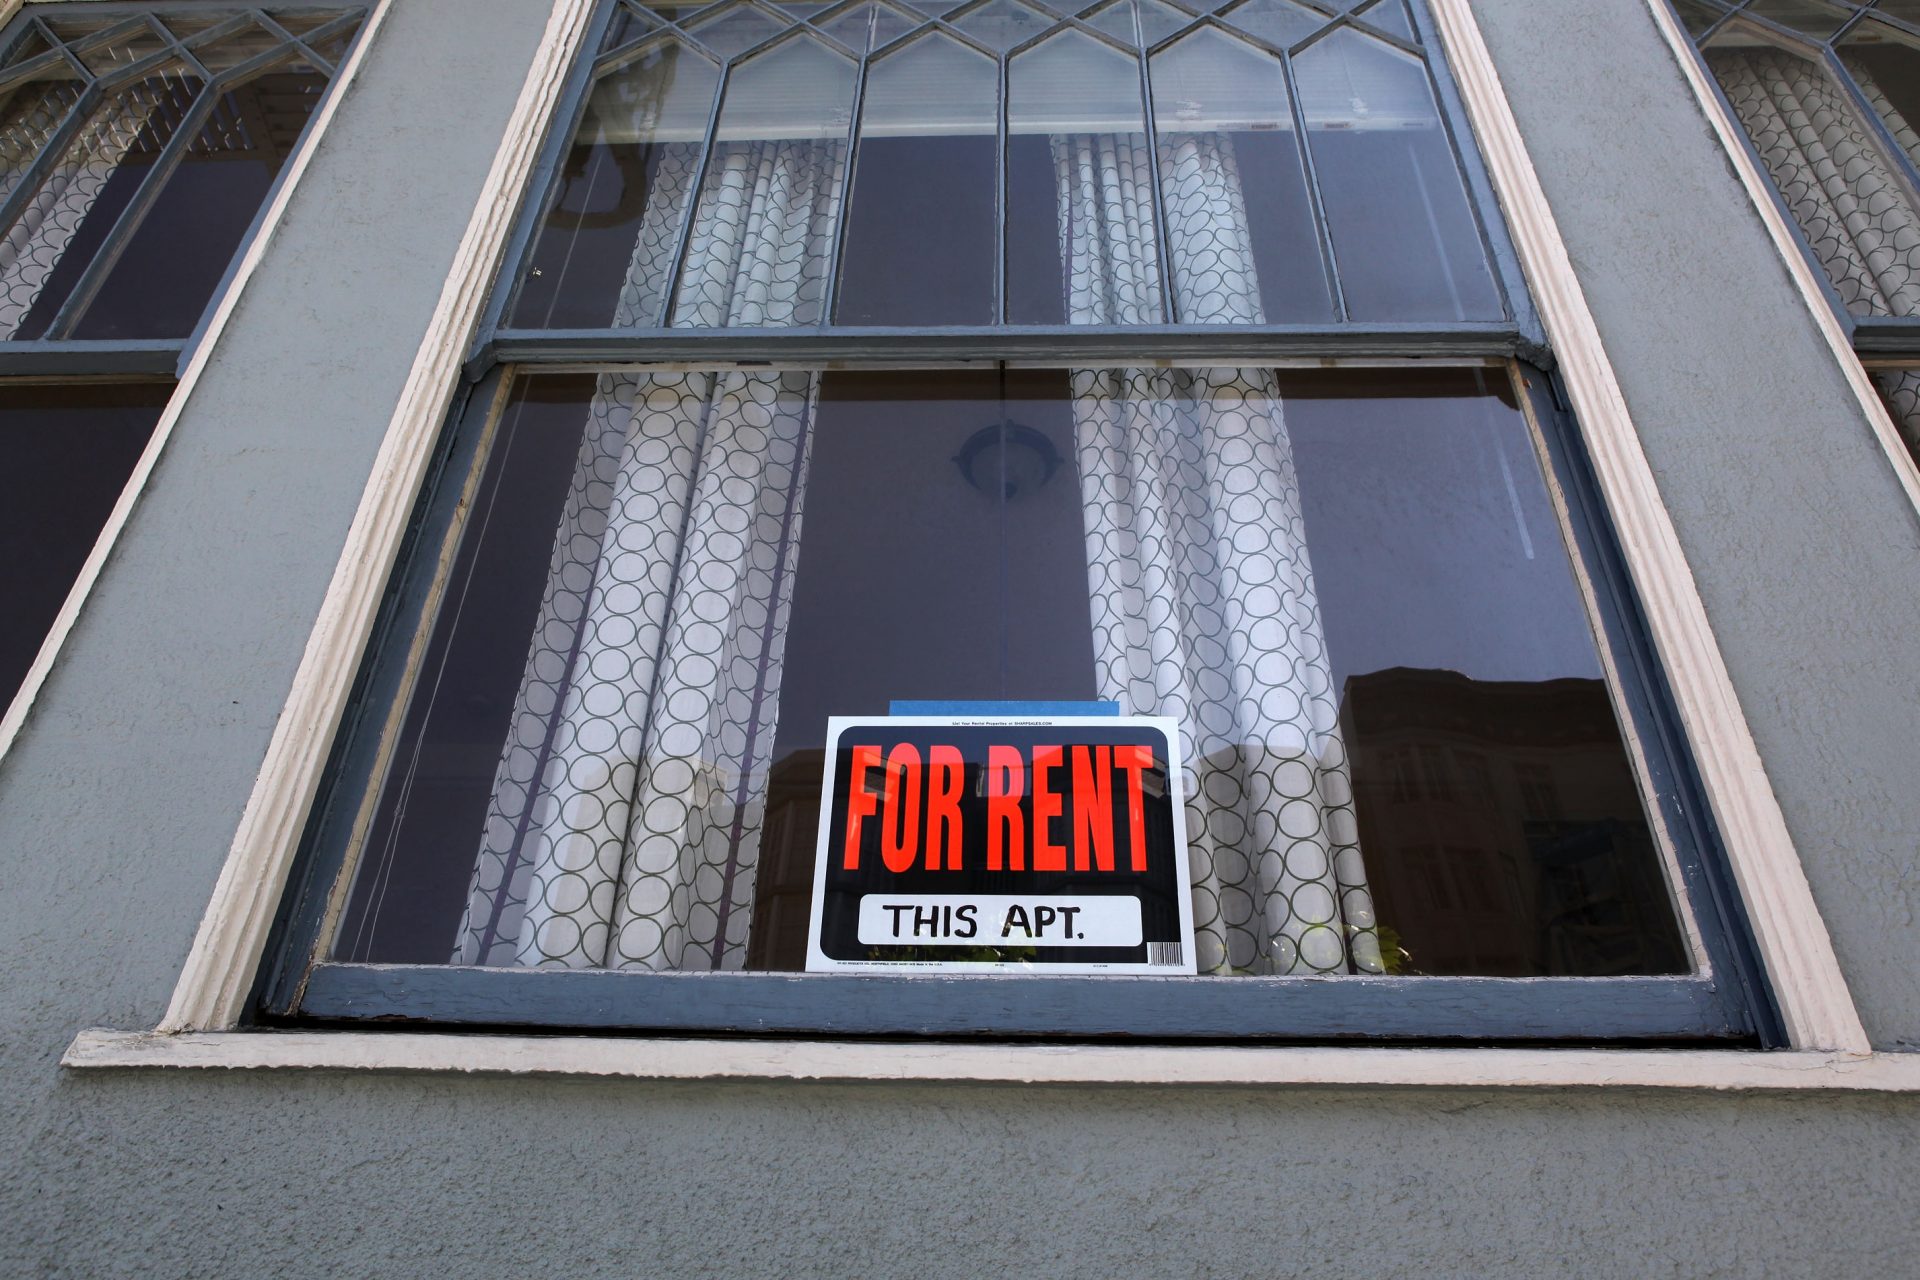 Renters aren't as healthy as homeowners